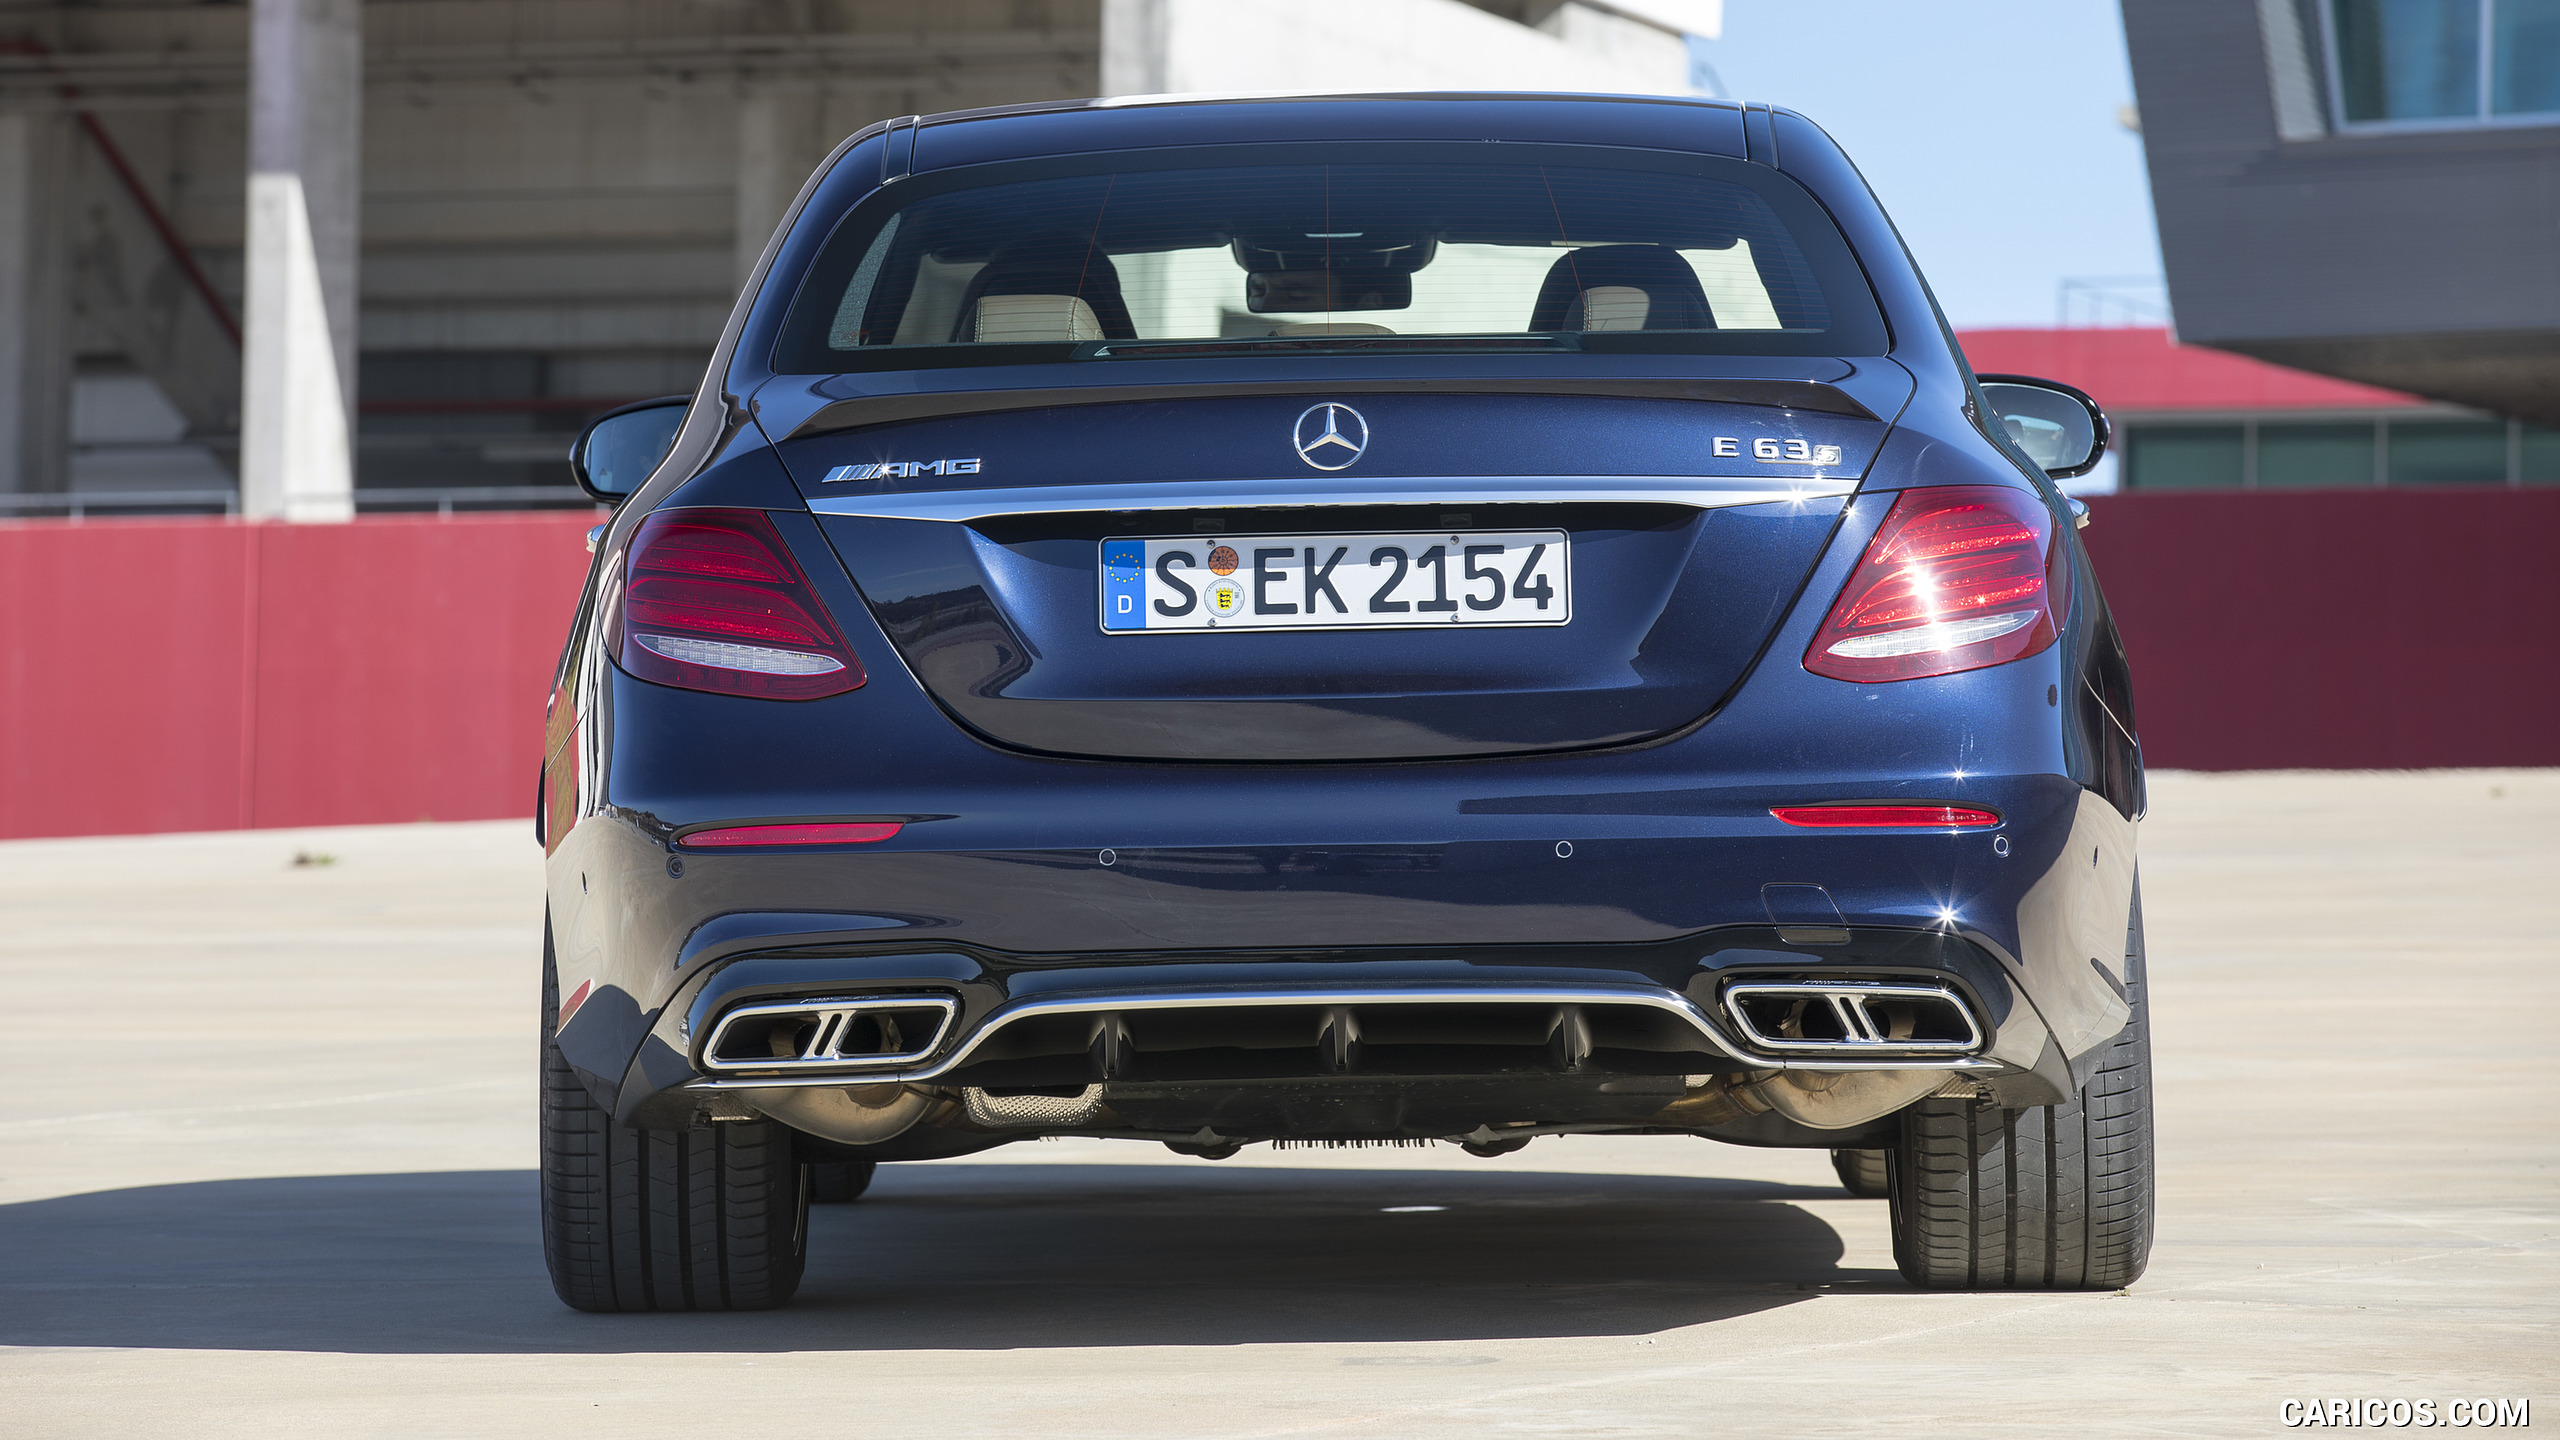 2018 Mercedes-AMG E63 S 4MATIC+ - Rear, #198 of 323